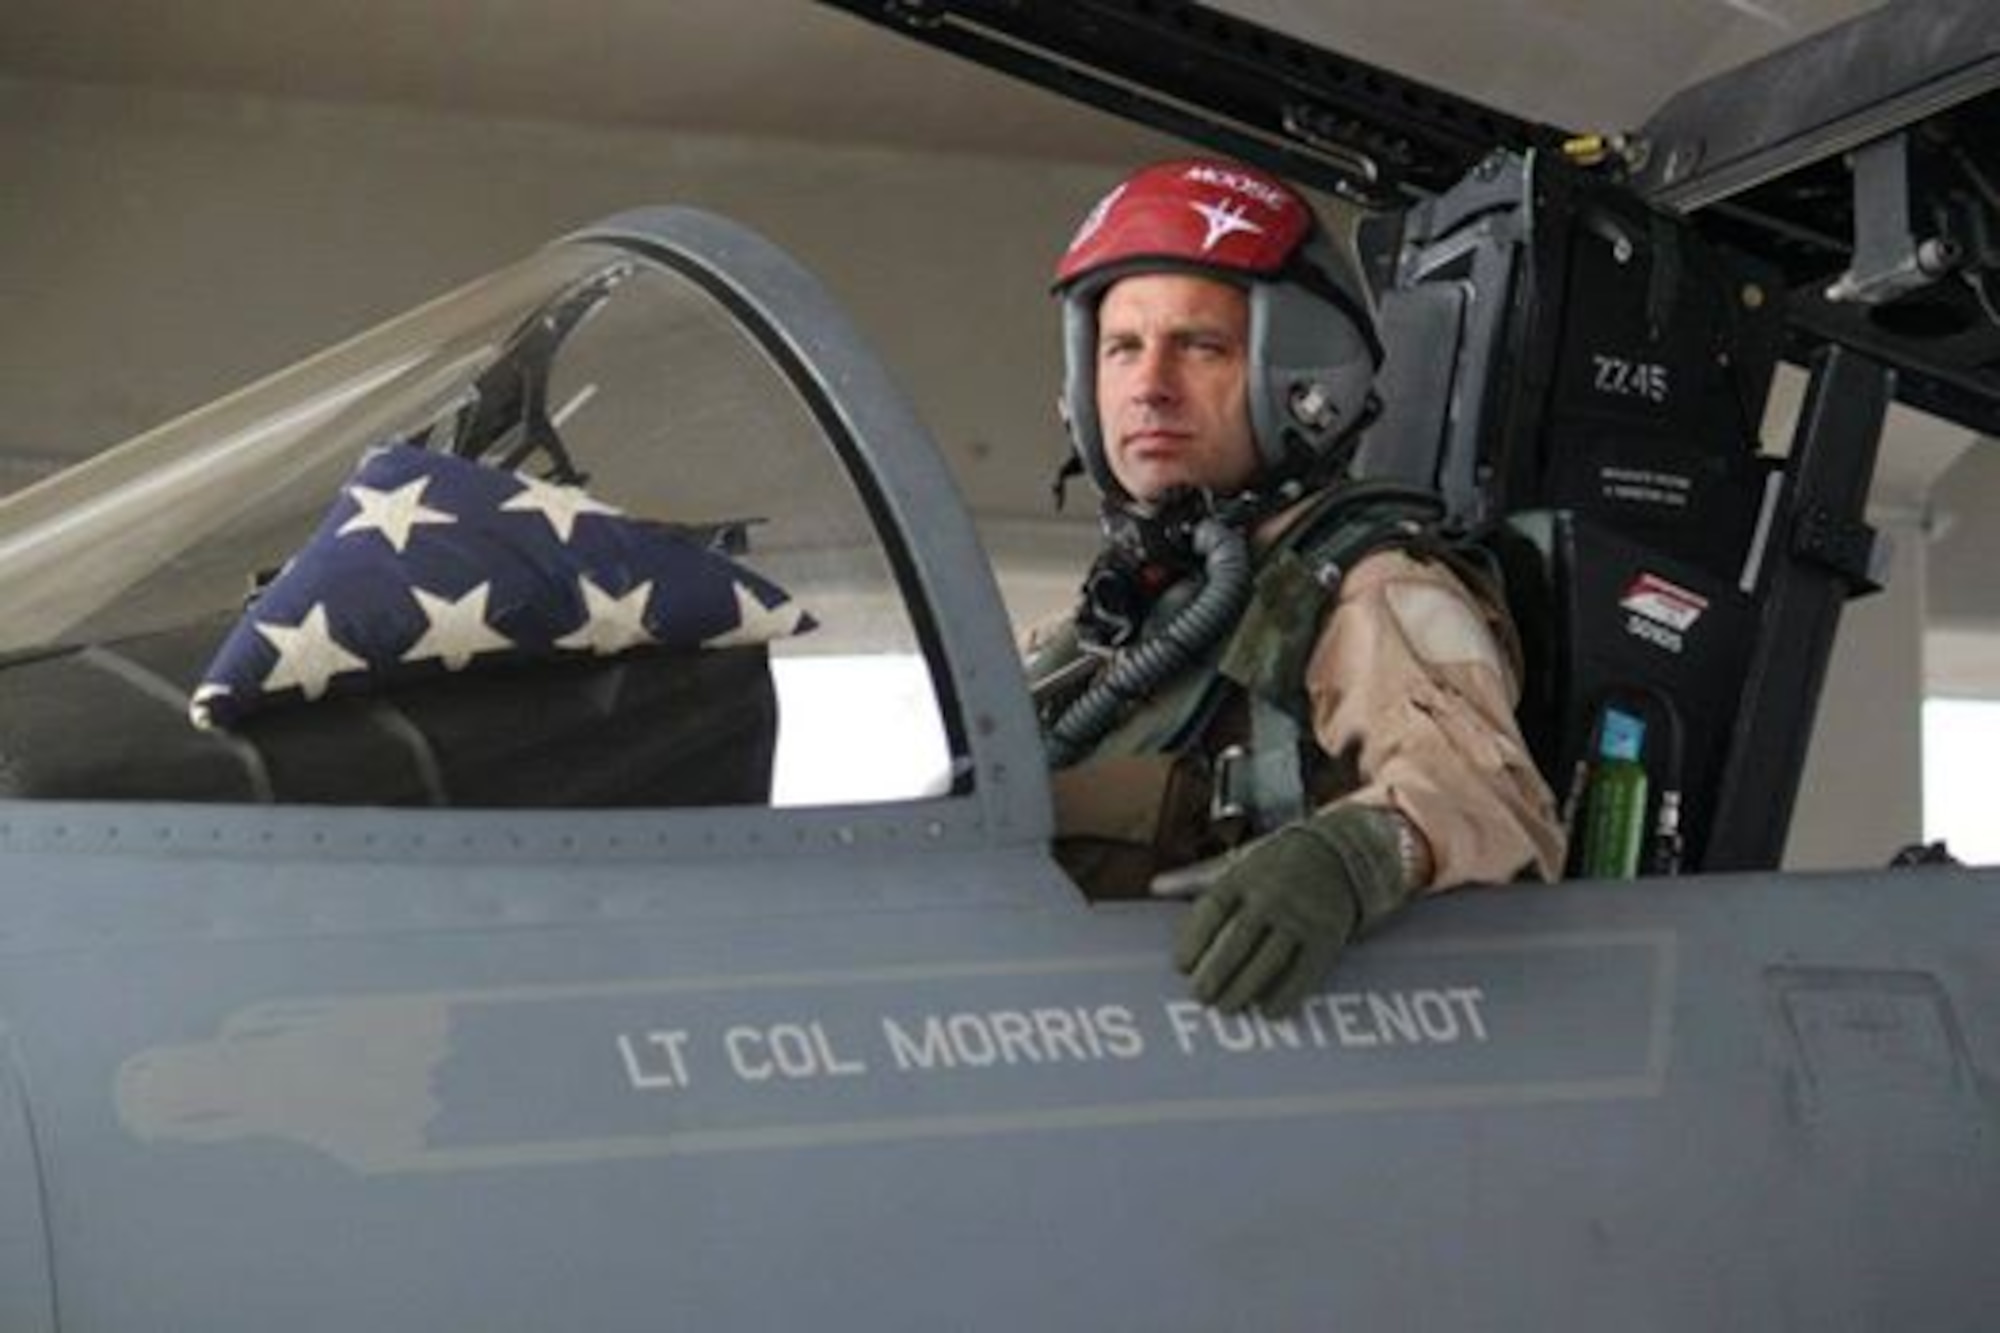 Lt. Col. Morris "Moose" Fontenot Jr.
(Photo provided by the family)